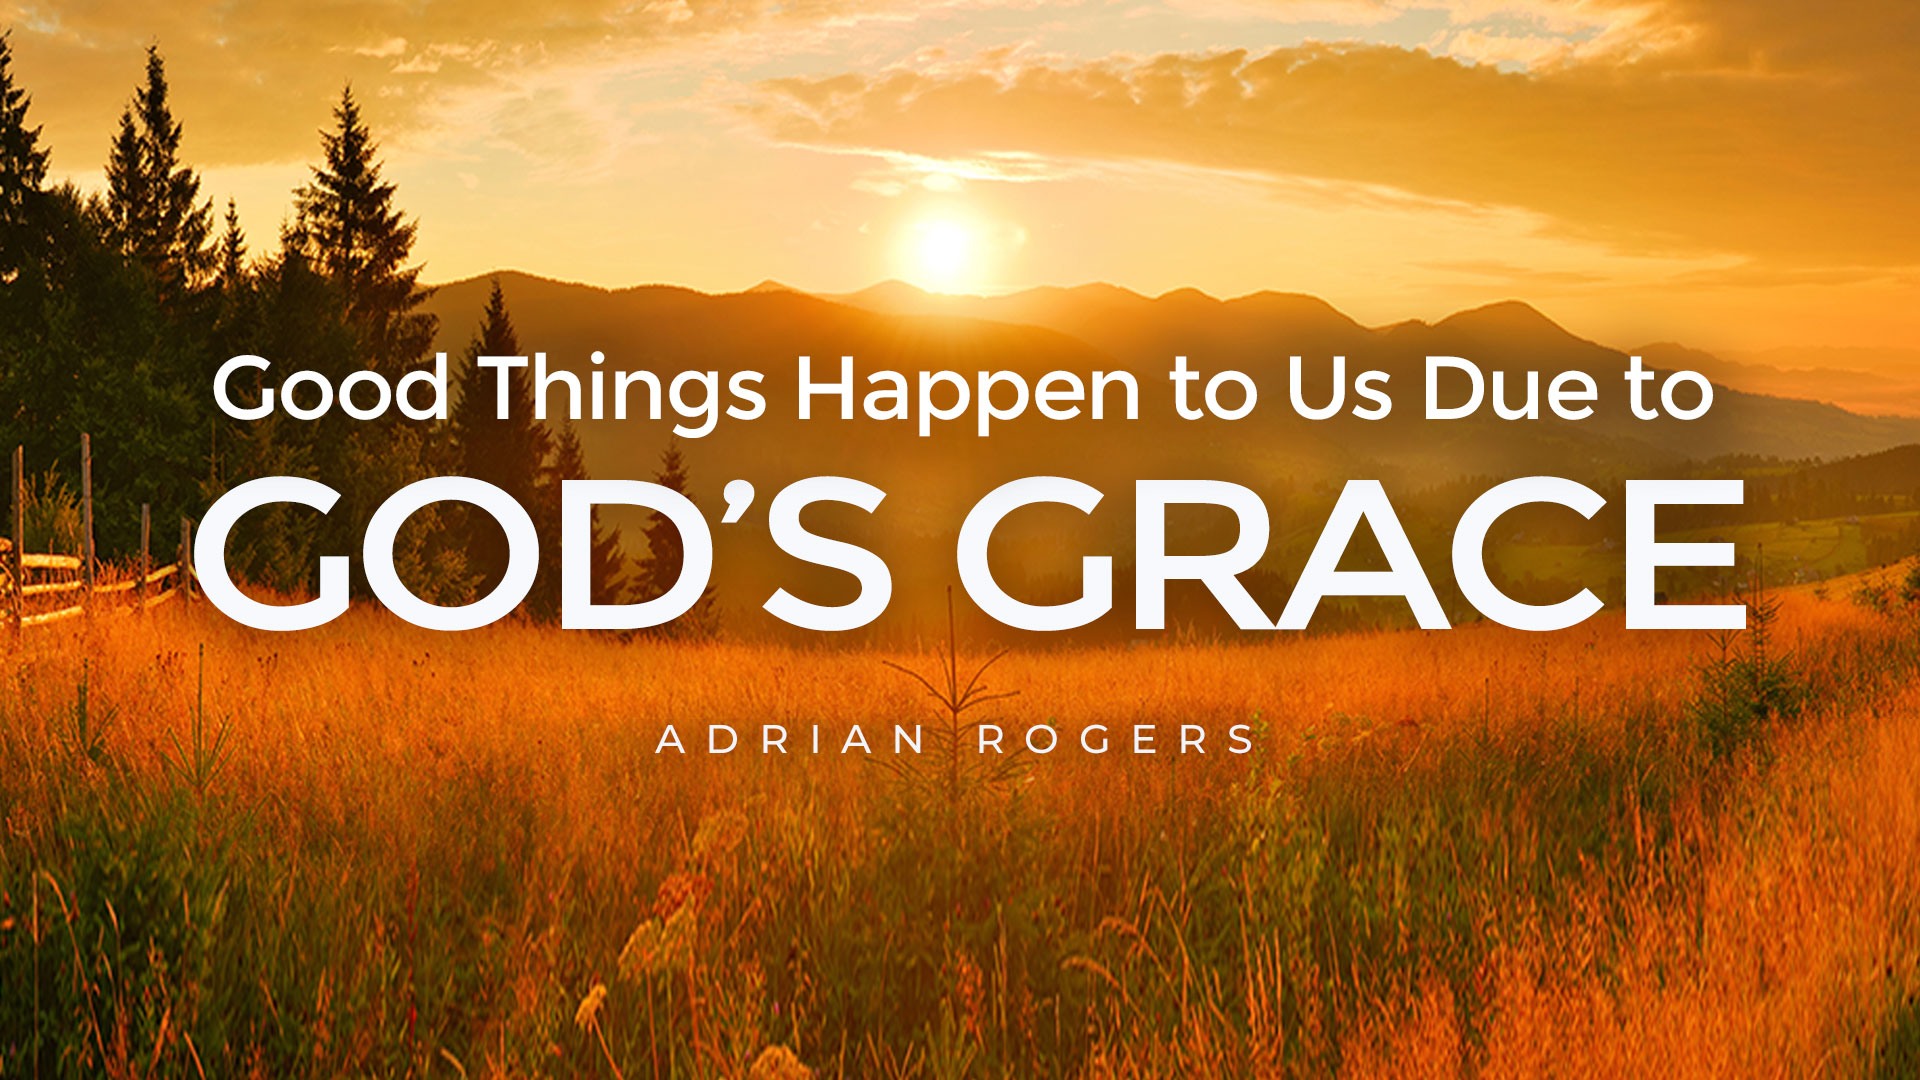 Good Things Happen to Us Due to Gods Grace 1920x1080